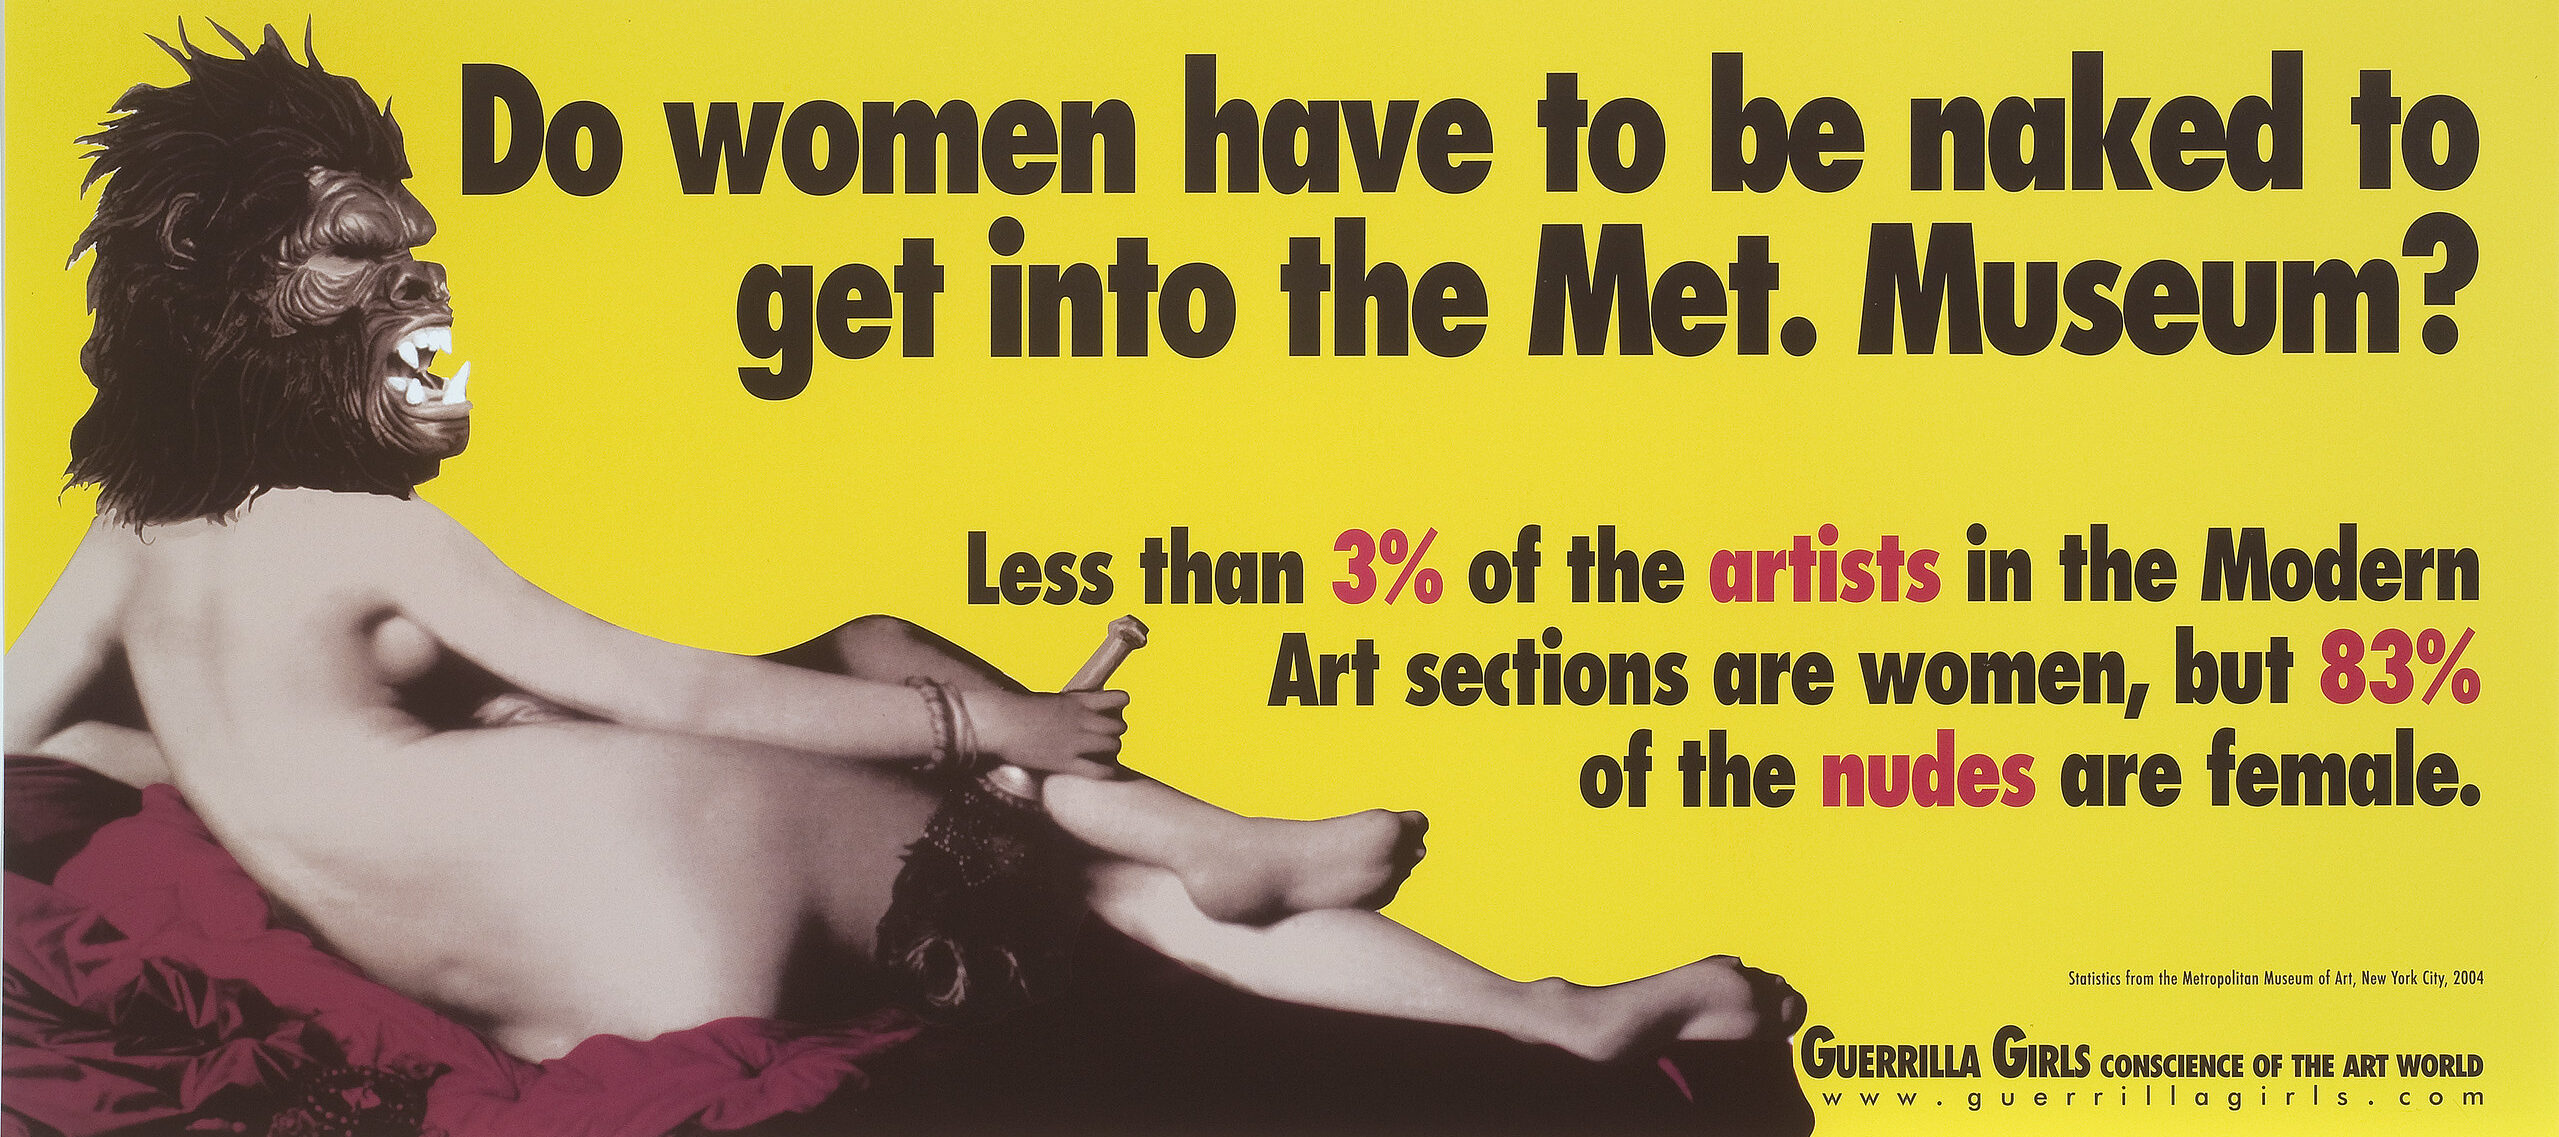 Reclining light skinned nude woman seen from behind wearing a gorilla mask on bright yellow background. Large black text reads, "Do women have to be naked to get into the Met. Museum?" Smaller black and red text reads, "Less than 3% of artists in the Modern Art sections are women, but 83% of the nudes are female."